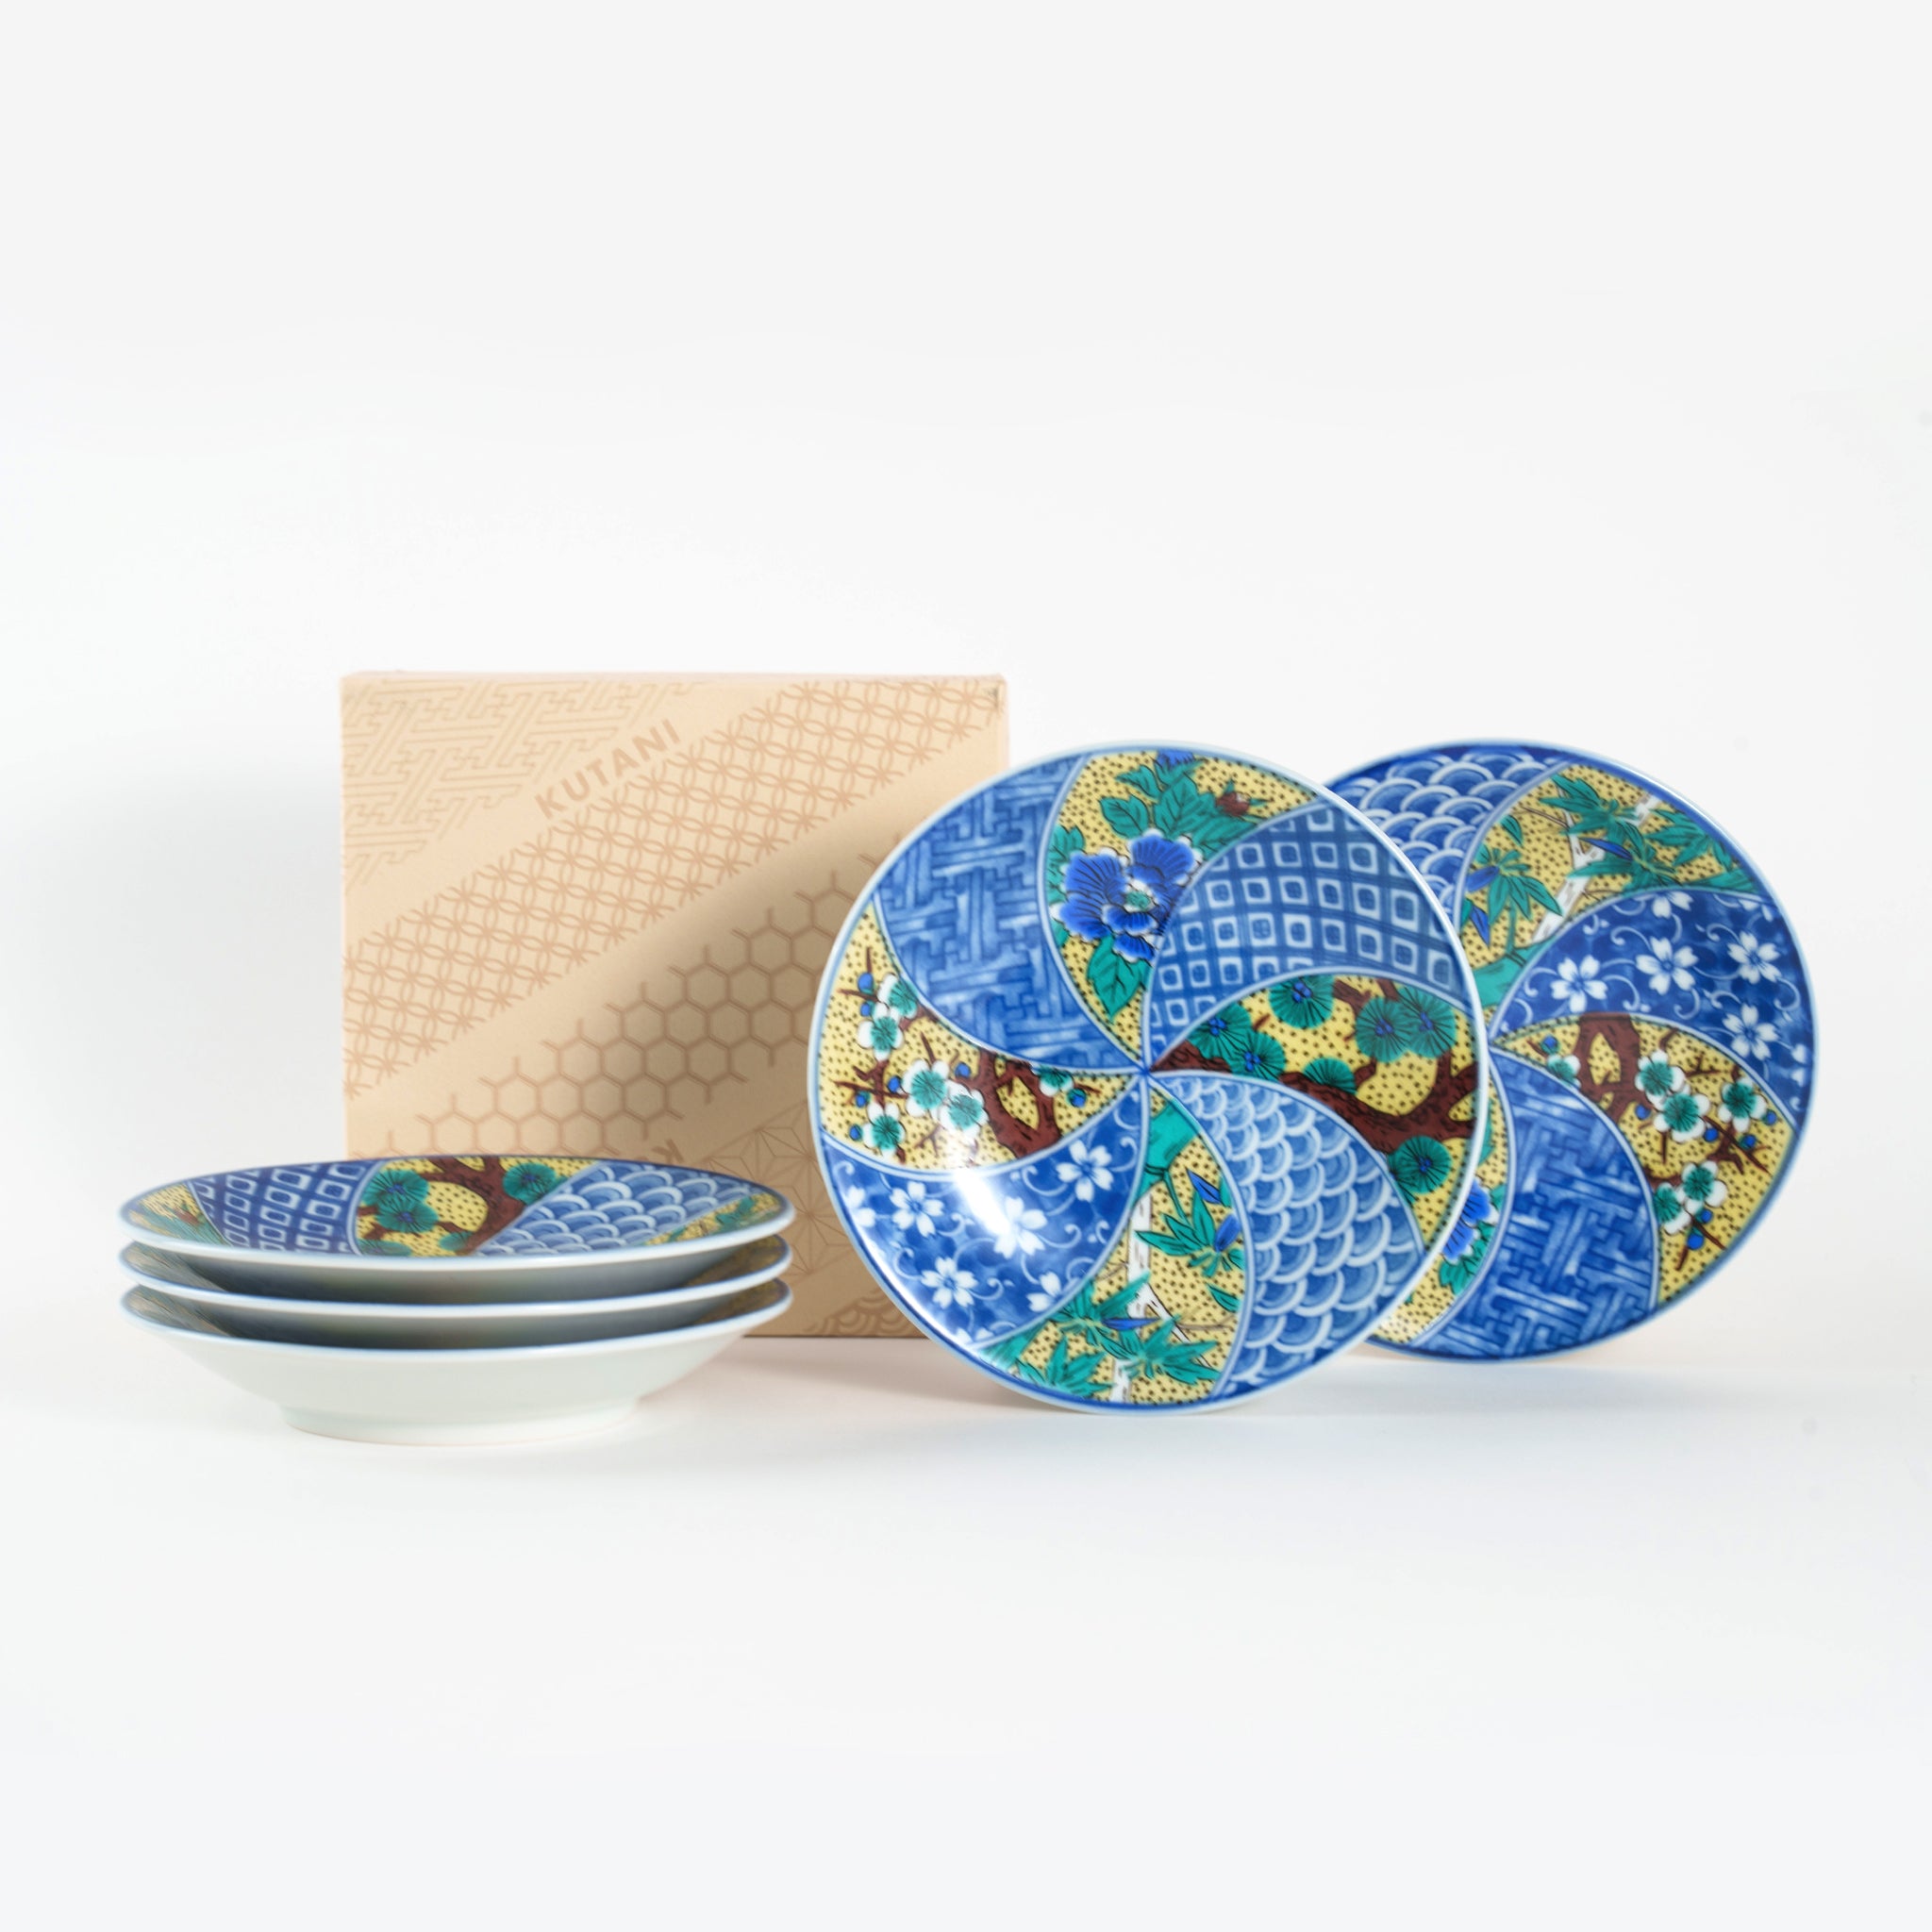 Handcrafted Plates Collection: Everyday Use, Stylish Decor 